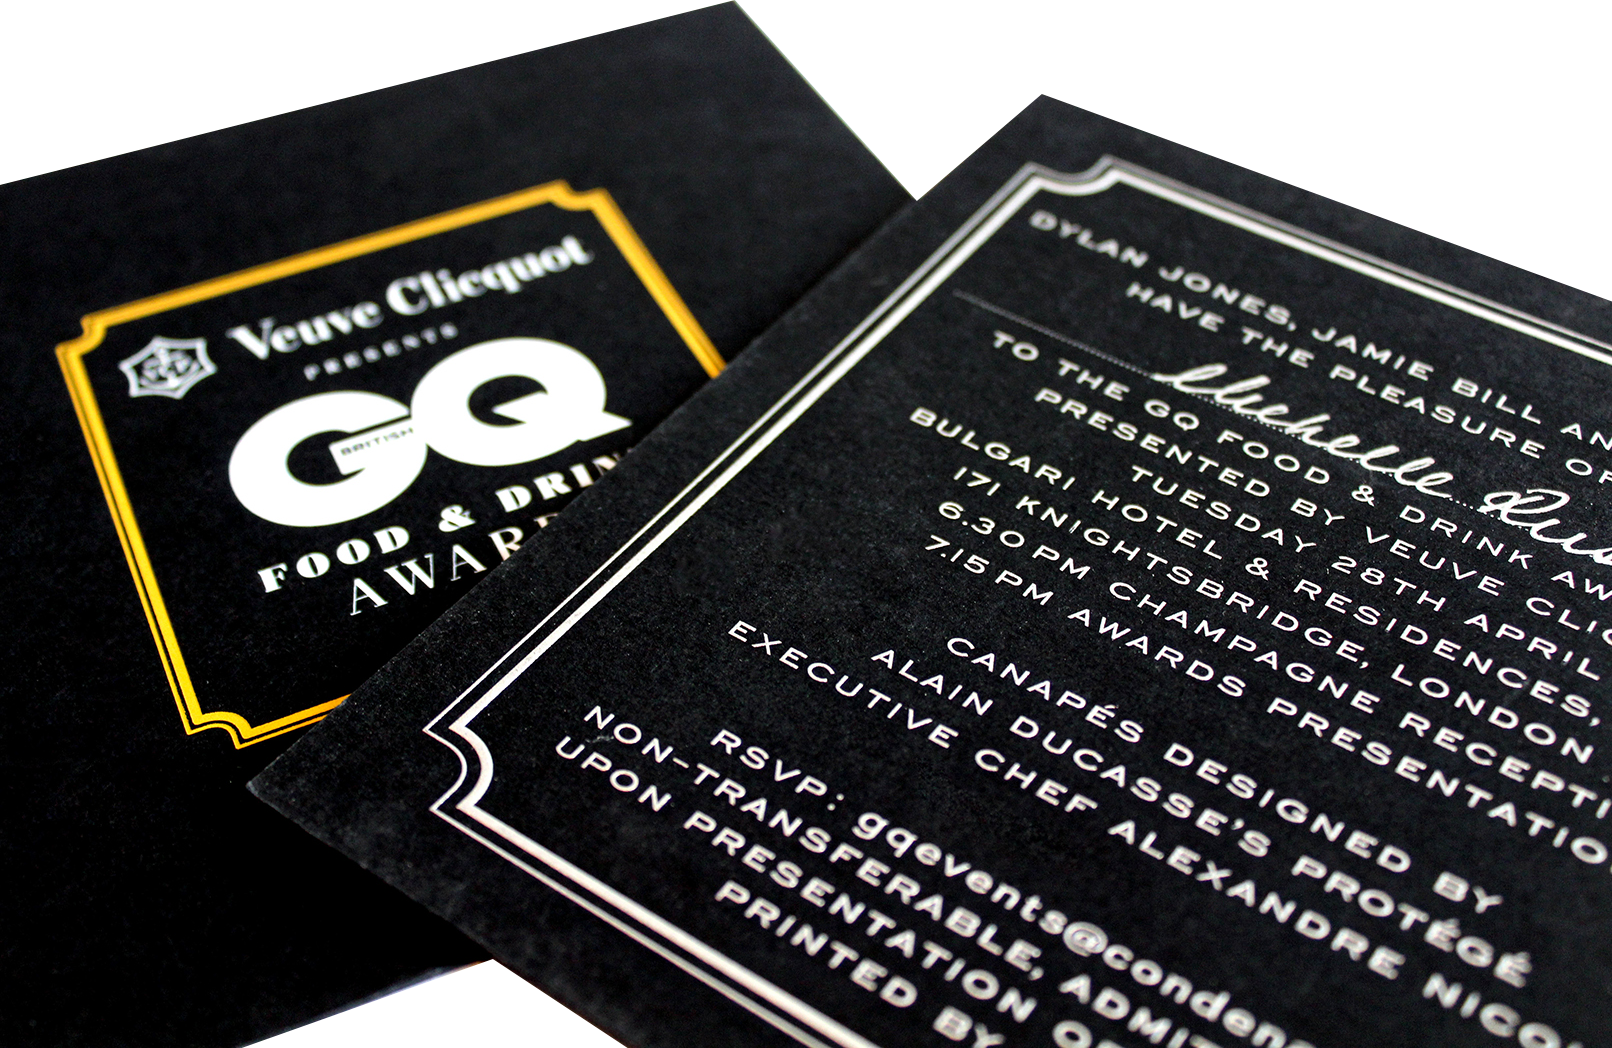 upmarket invitation on black card with gold foil and white debossing